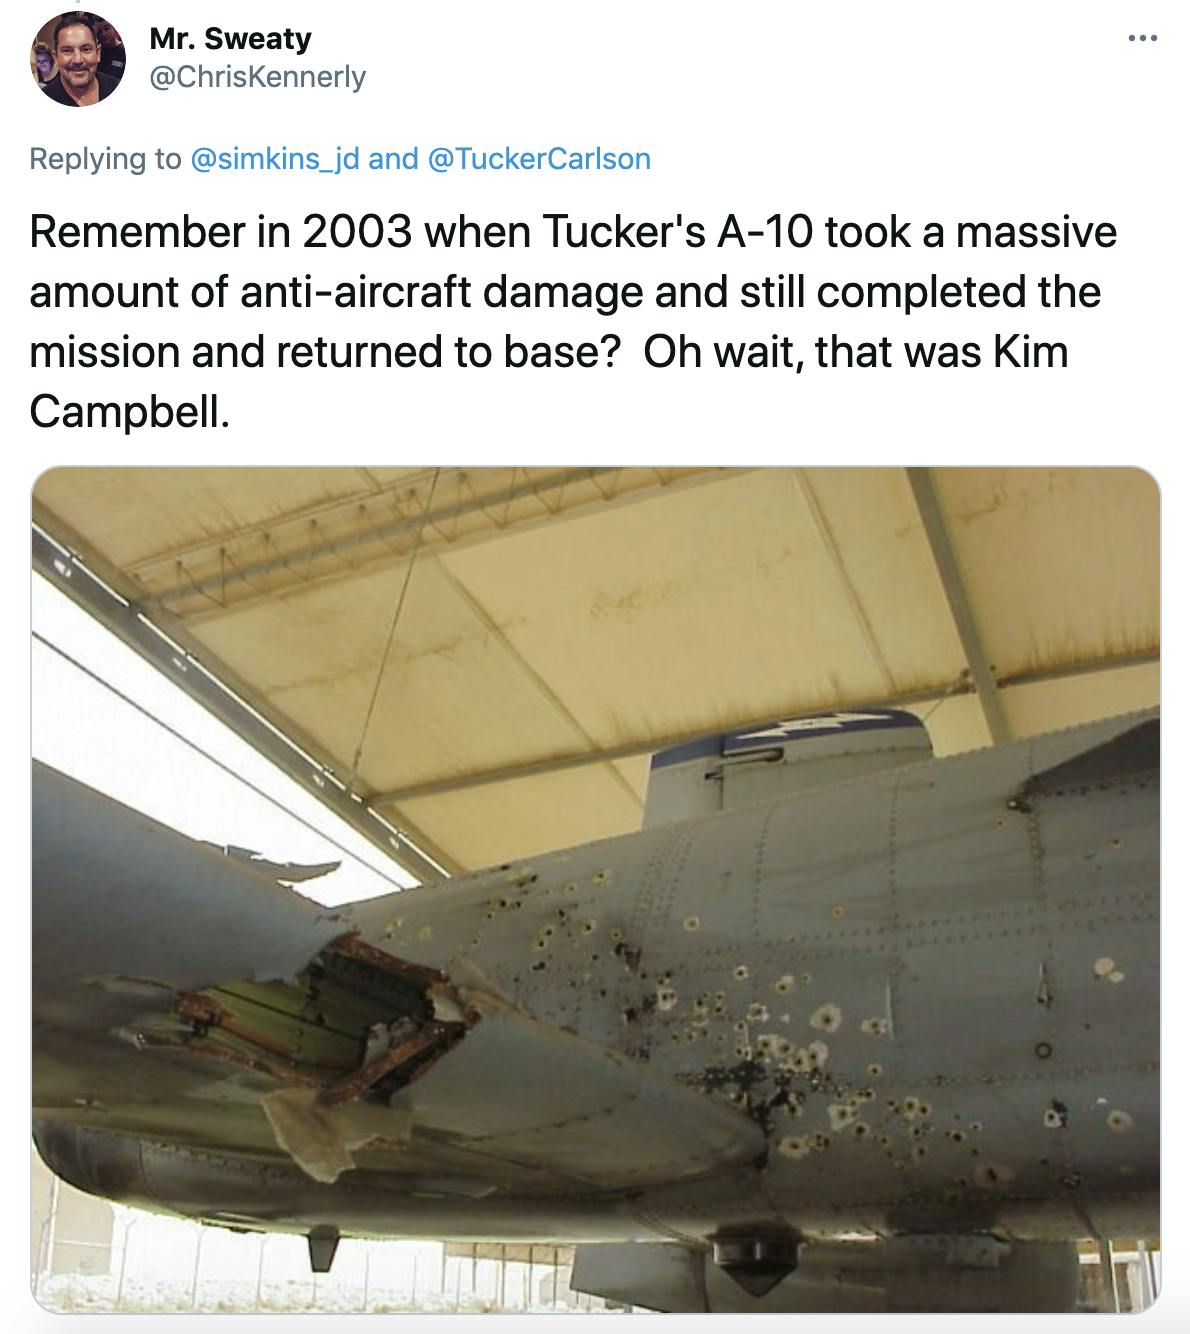 'Remember in 2003 when Tucker's A-10 took a massive amount of anti-aircraft damage and still completed the mission and returned to base? Oh wait, that was Kim Campbell.' the side of an aircraft full of bullet holes